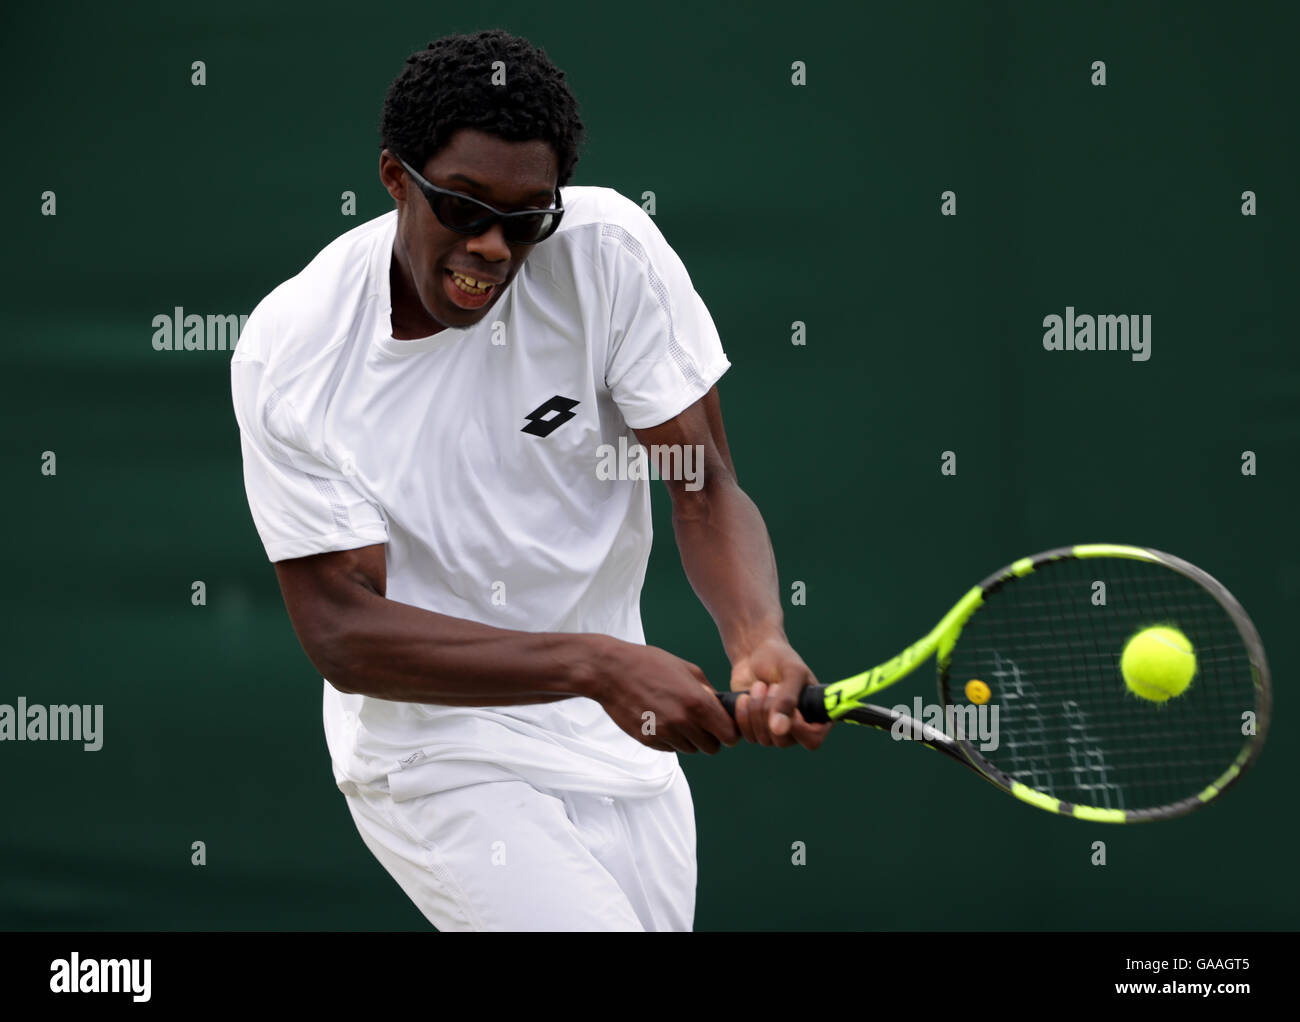 Olukayode Alafia Damina Ayeni in action in the boys singles on day seven of the Wimbledon Championships at the All England Lawn Tennis and Croquet Club, Wimbledon. PRESS ASSOCIATION Photo. Picture date: Monday July 4, 2016. See PA story TENNIS Wimbledon. Photo credit should read: Adam Davy/PA Wire. RESTRICTIONS: Editorial use only. No commercial use without prior written consent of the AELTC. Still image use only - no moving images to emulate broadcast. No superimposing or removal of sponsor/ad logos. Call +44 (0)1158 447447 for further information. Stock Photo